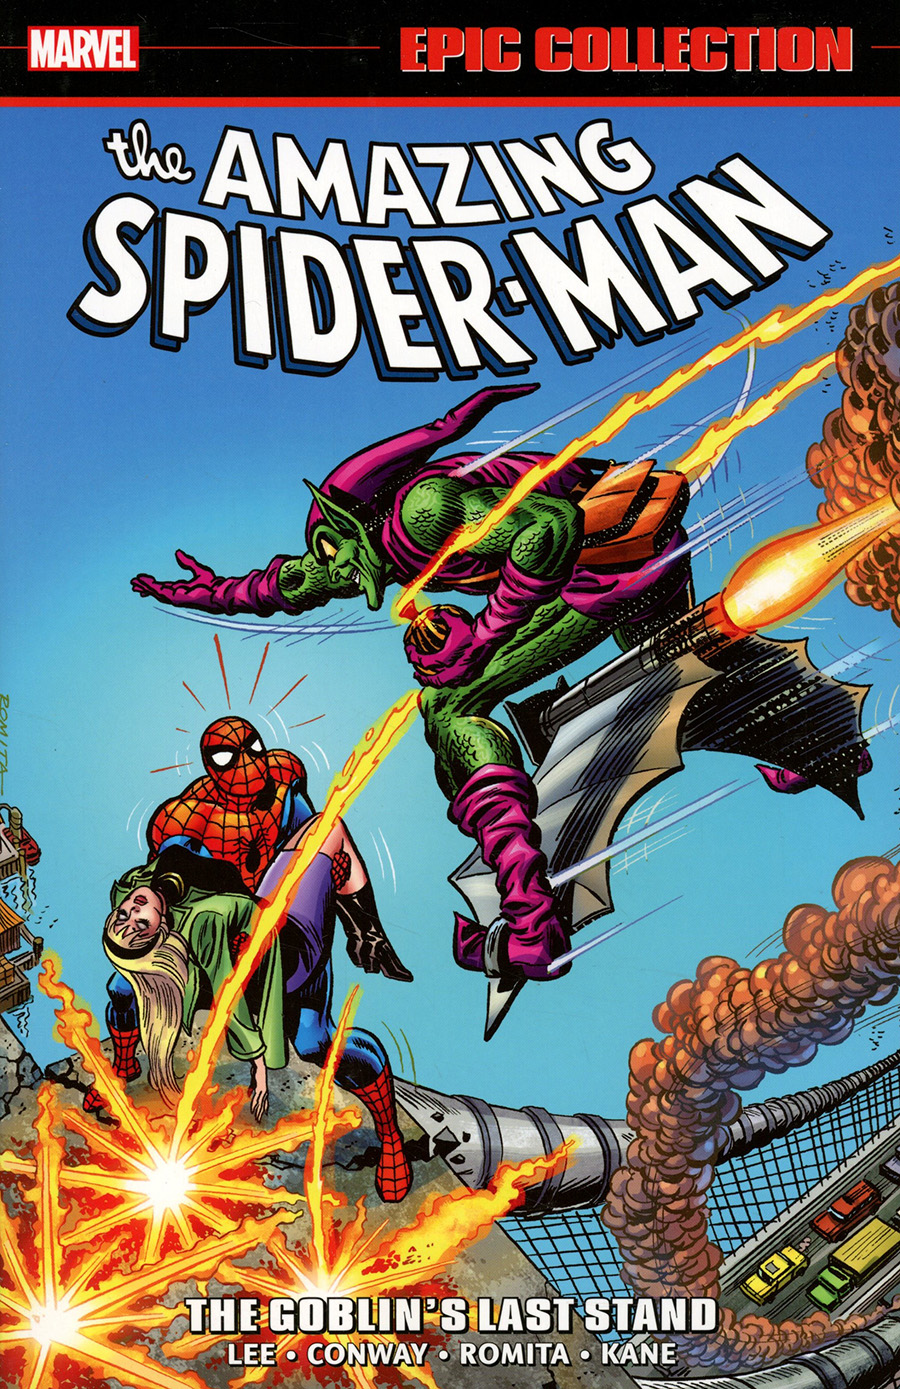 Amazing Spider-Man Epic Collection Vol 7 Goblins Last Stand TP New Printing